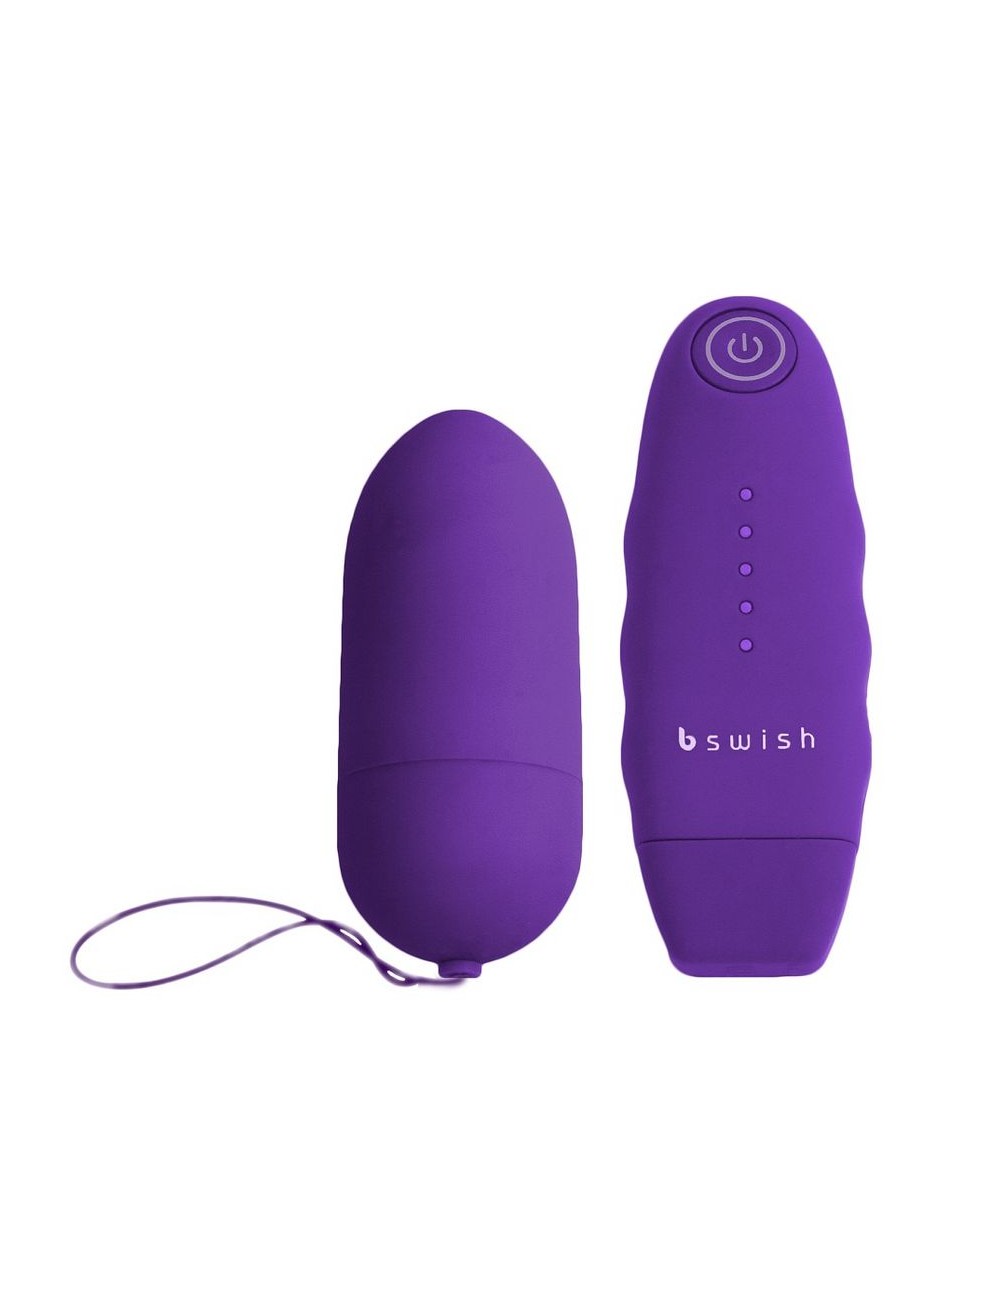 BNAUGHTY UNLEASHED CLASSIC LILA CONTROL REMOTO